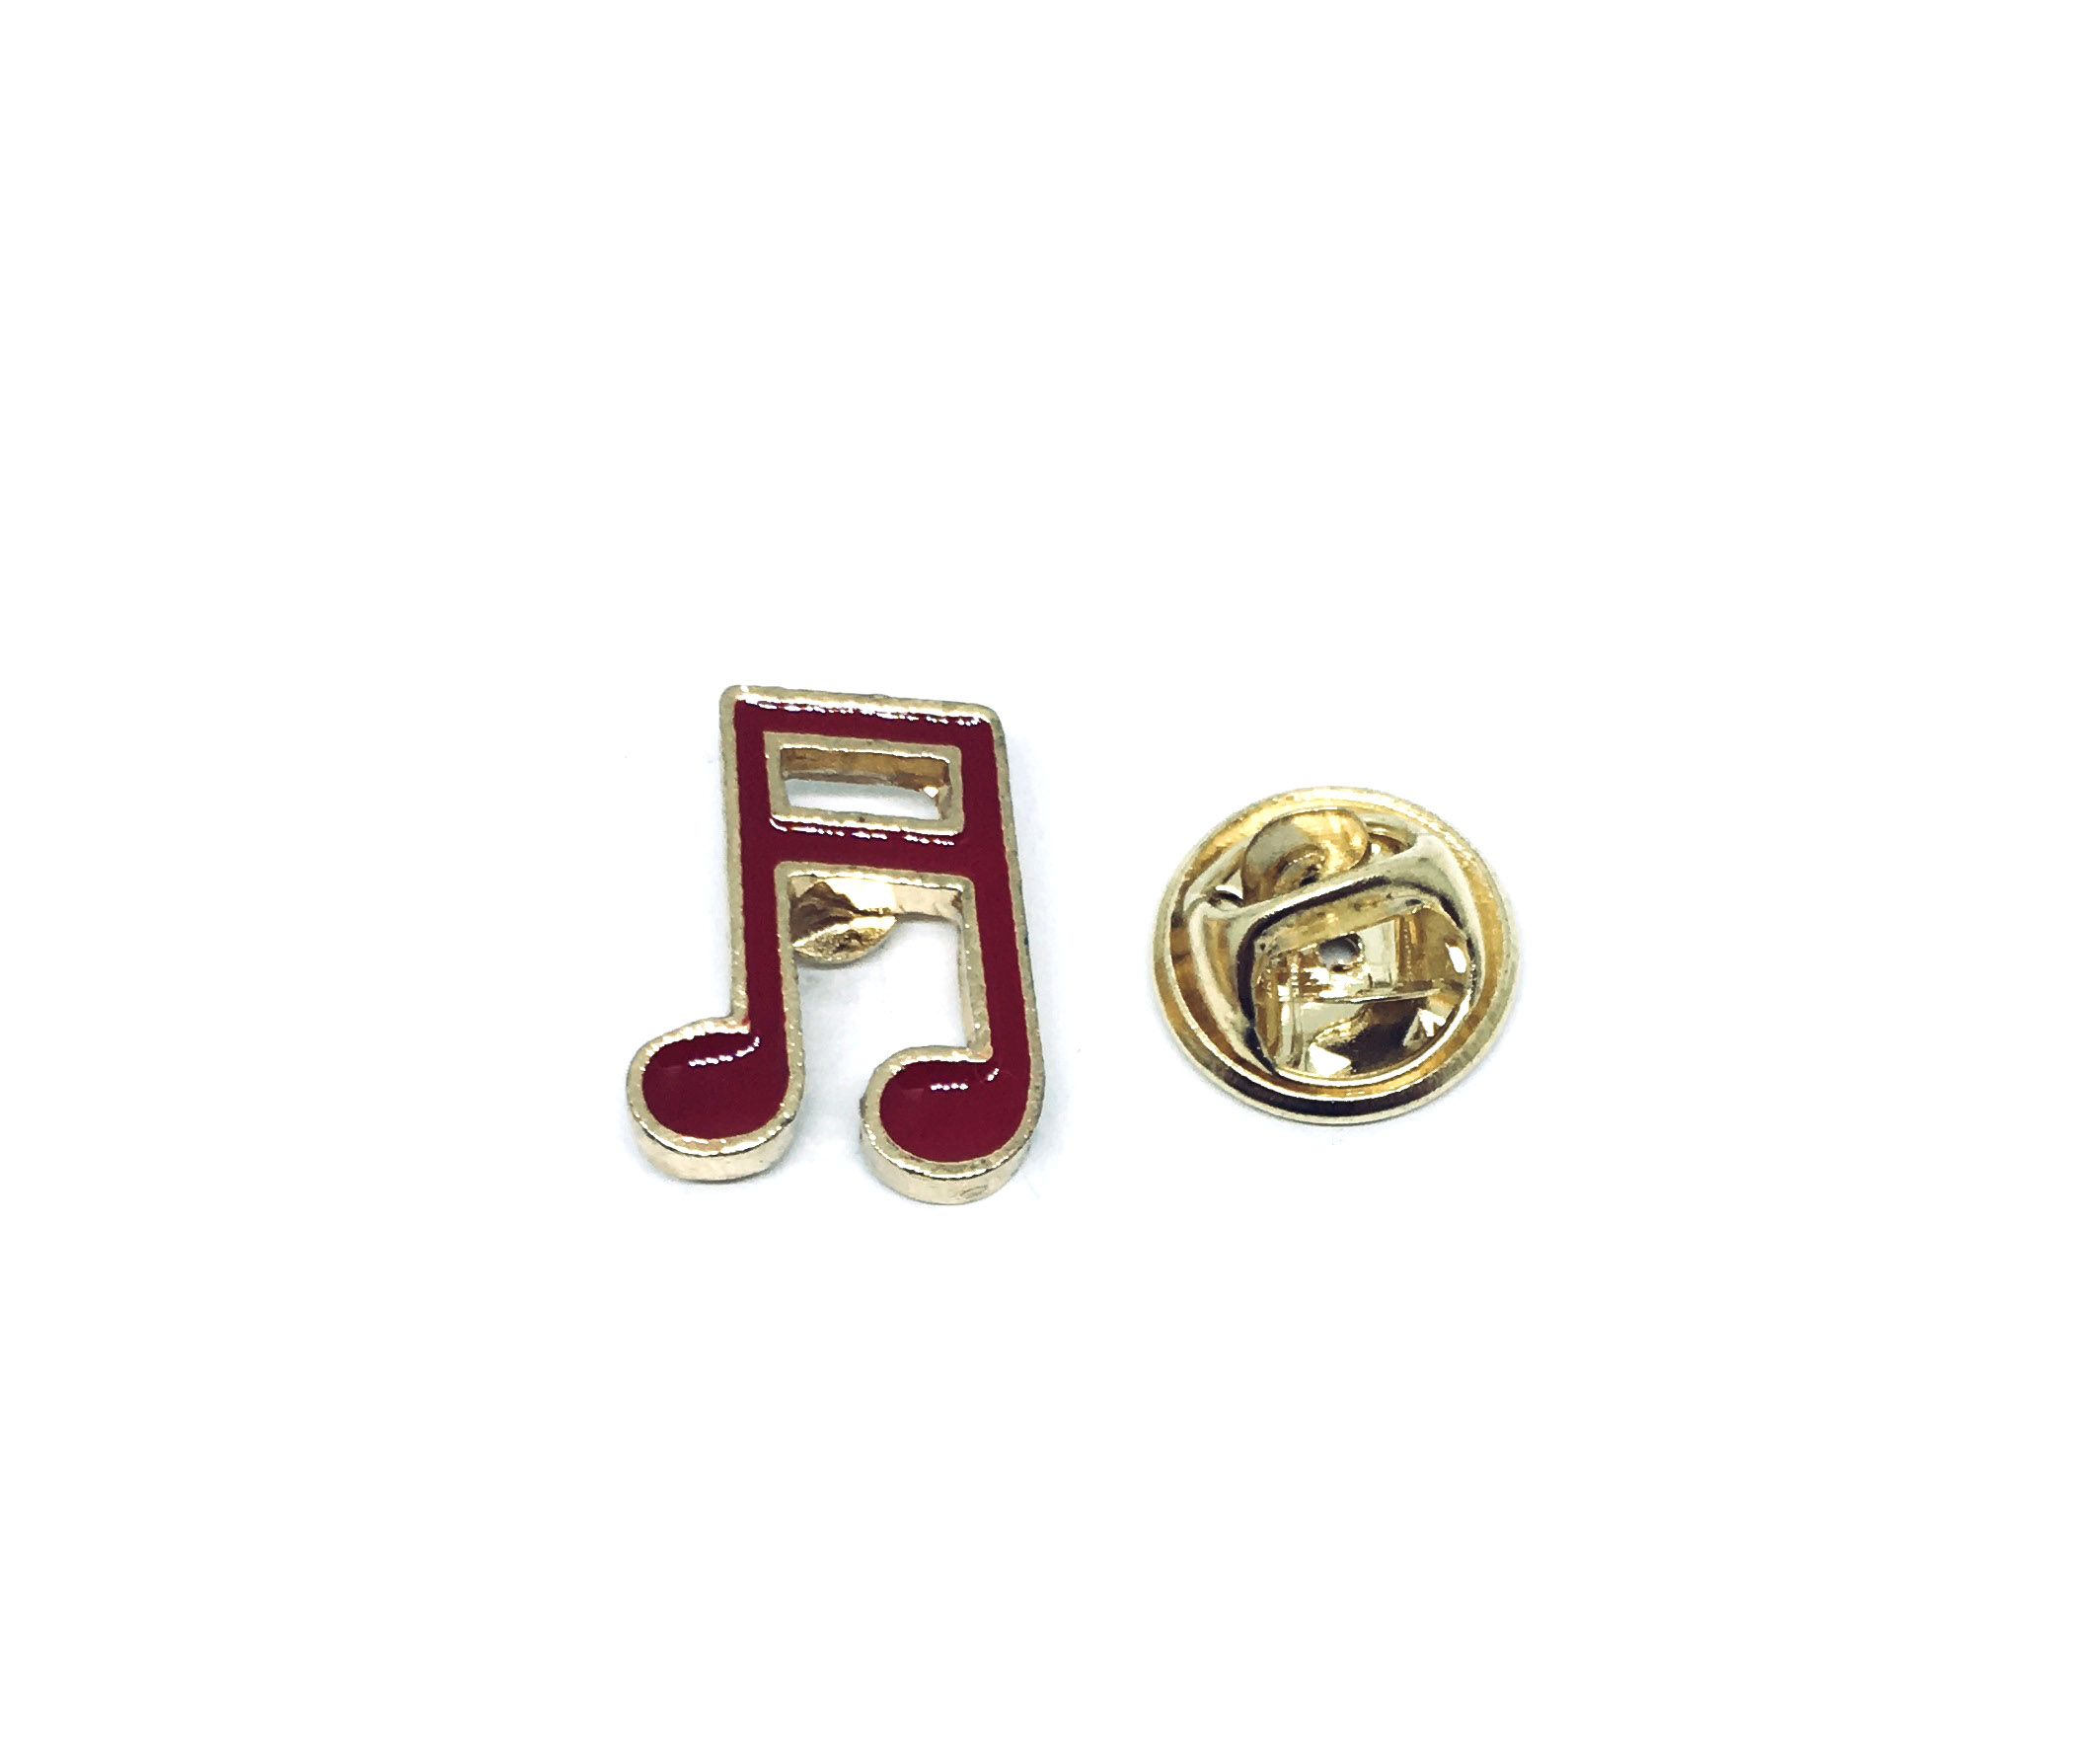 Musical Note Pin